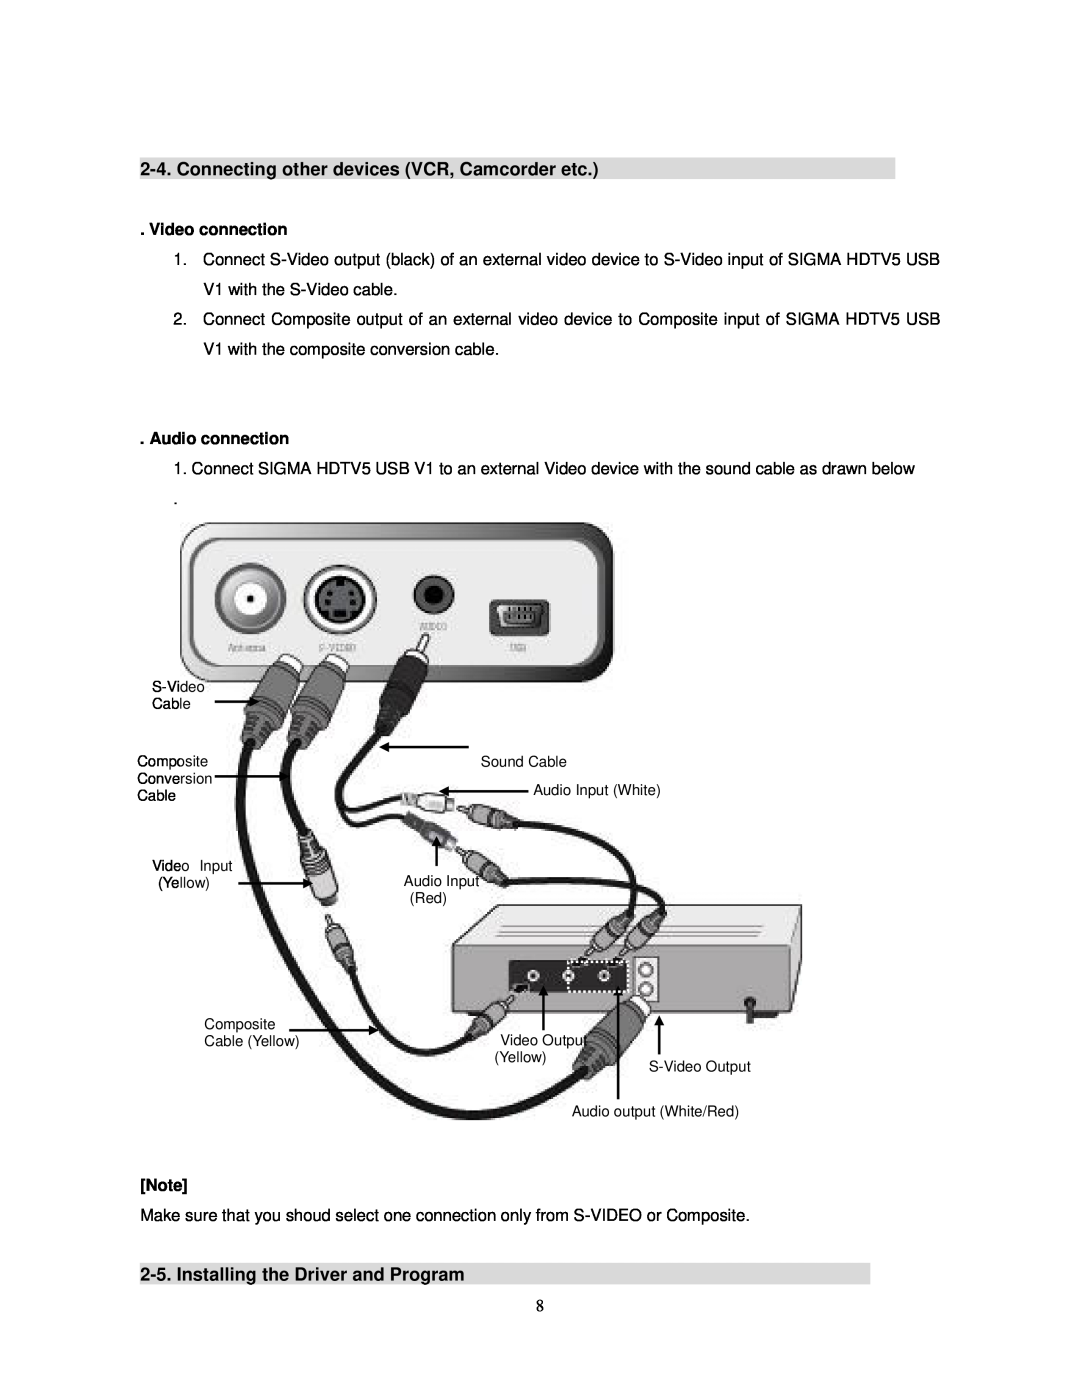 Sigma HDTV5 user manual Connecting other devices VCR, Camcorder etc, Installing the Driver and Program, Video connection 